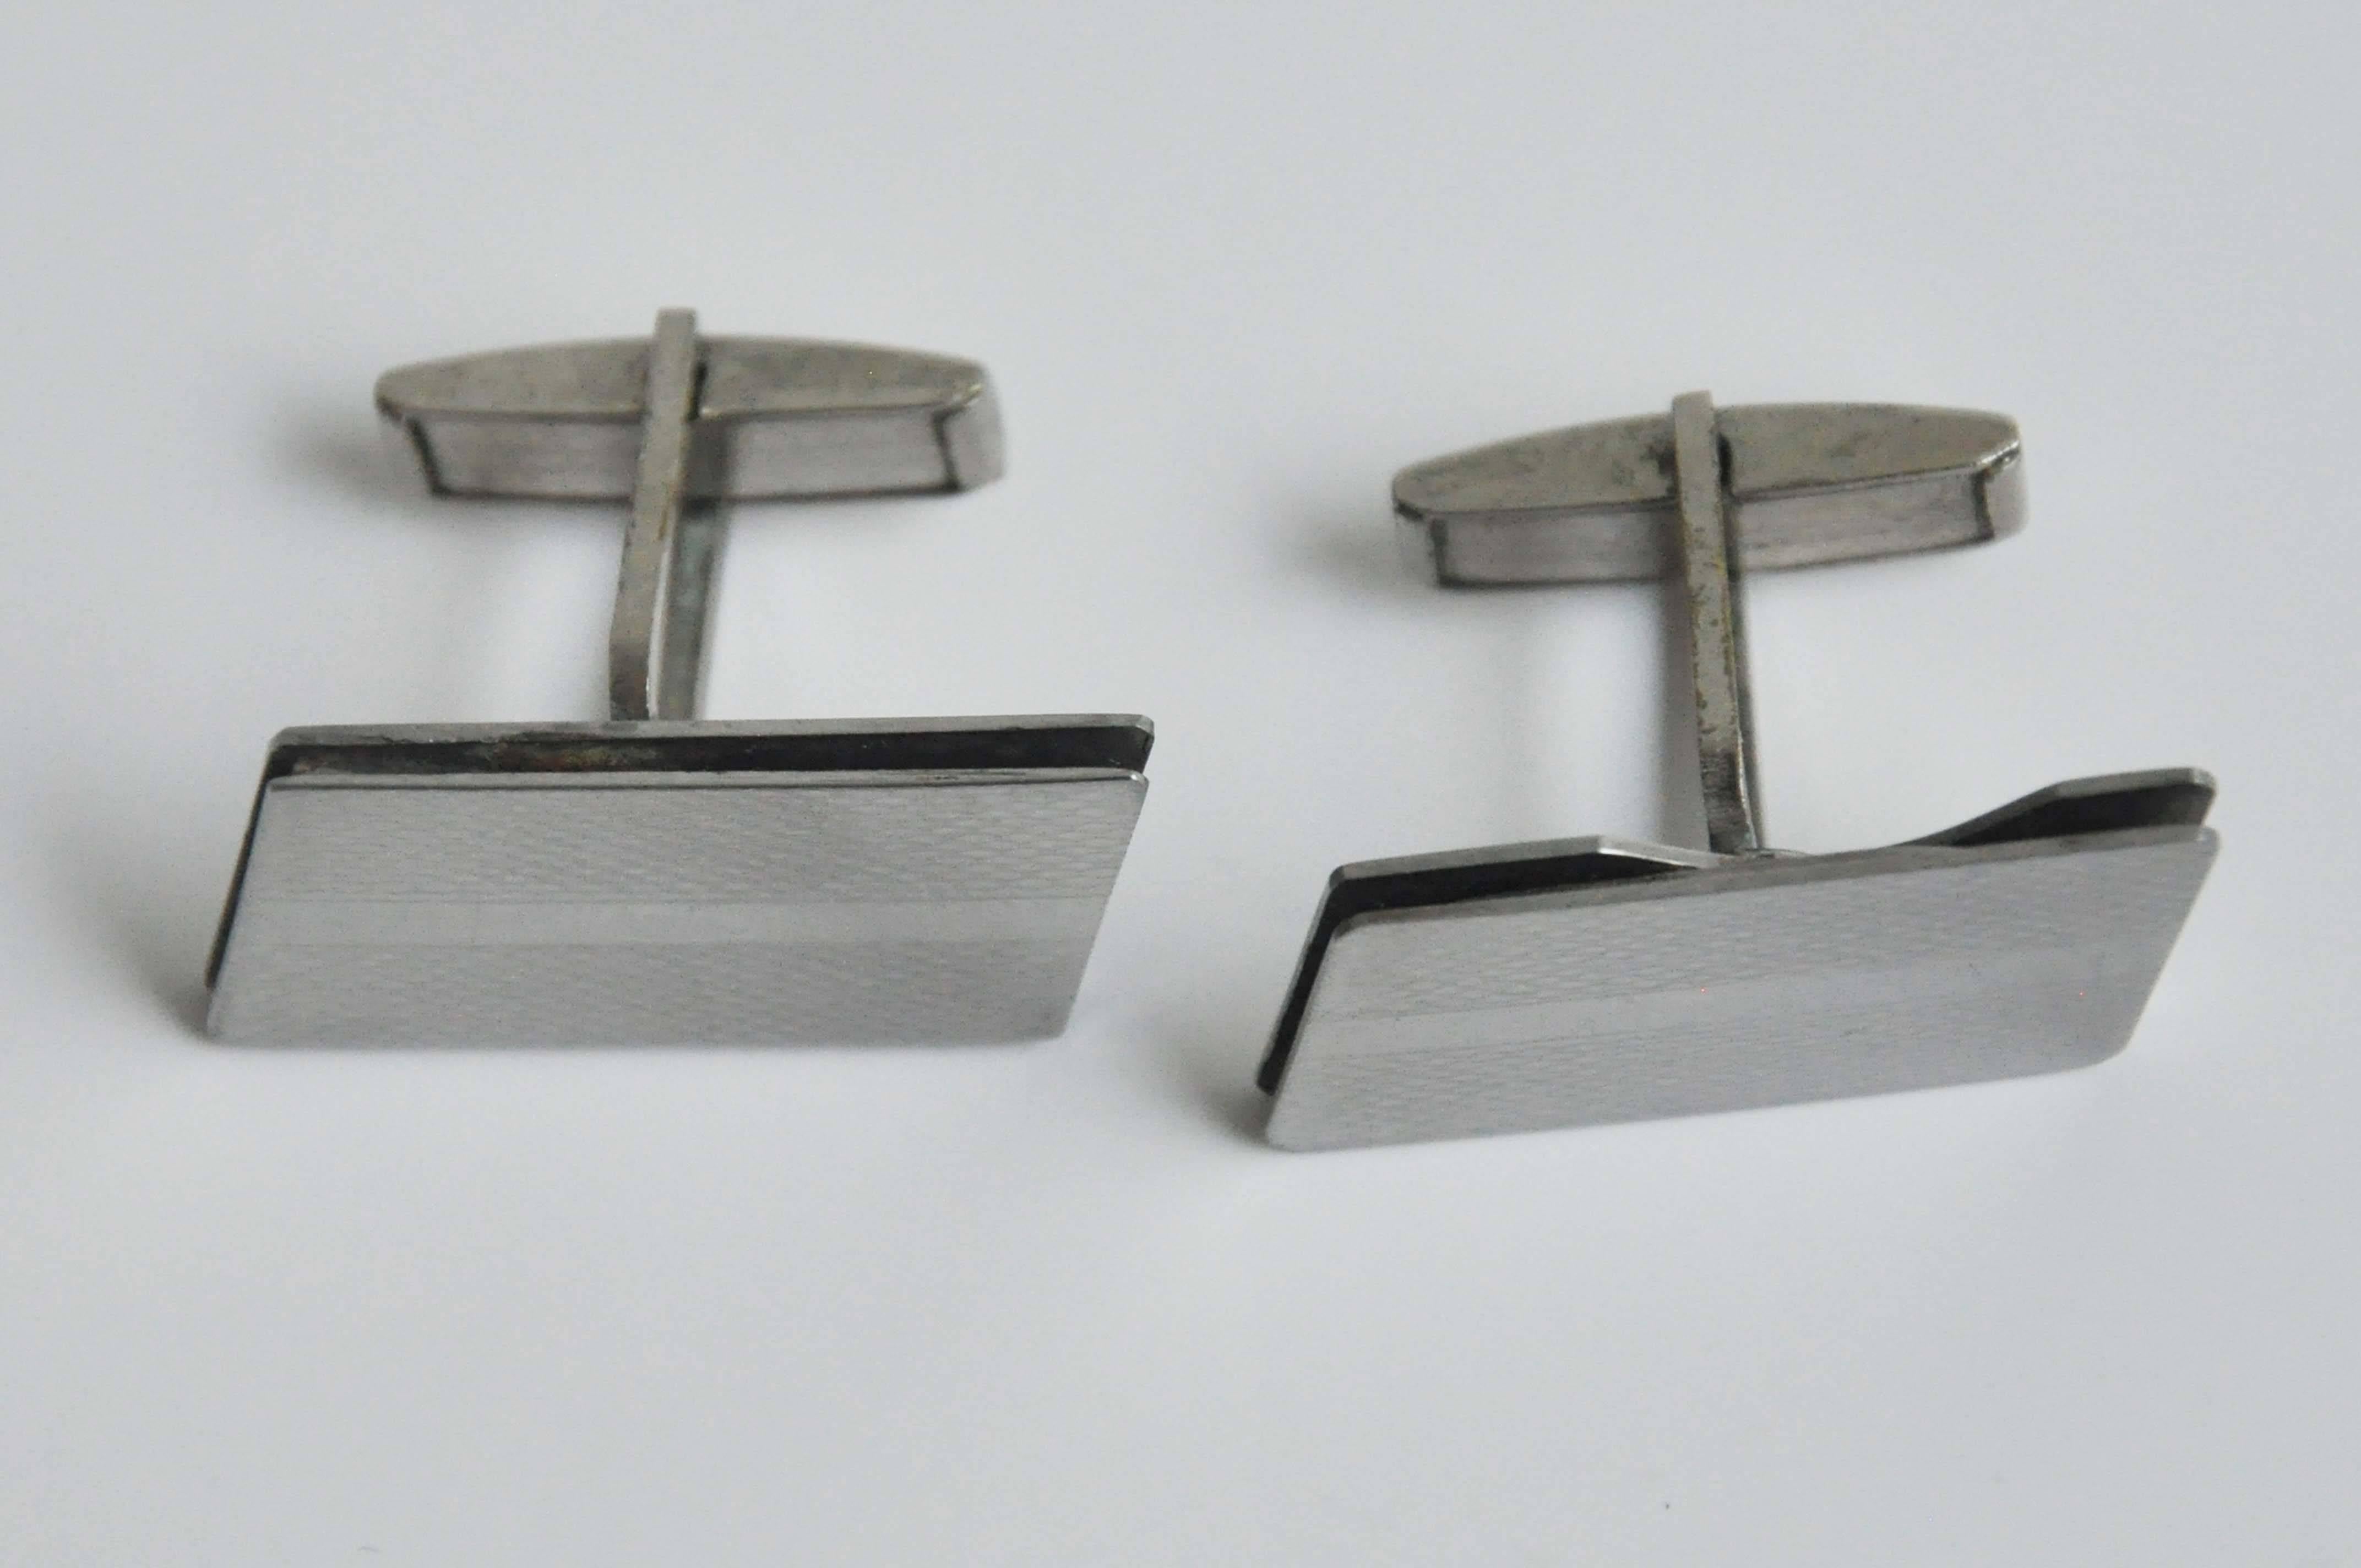 A pair of metal cufflinks from Italy reminiscent of the 70s 